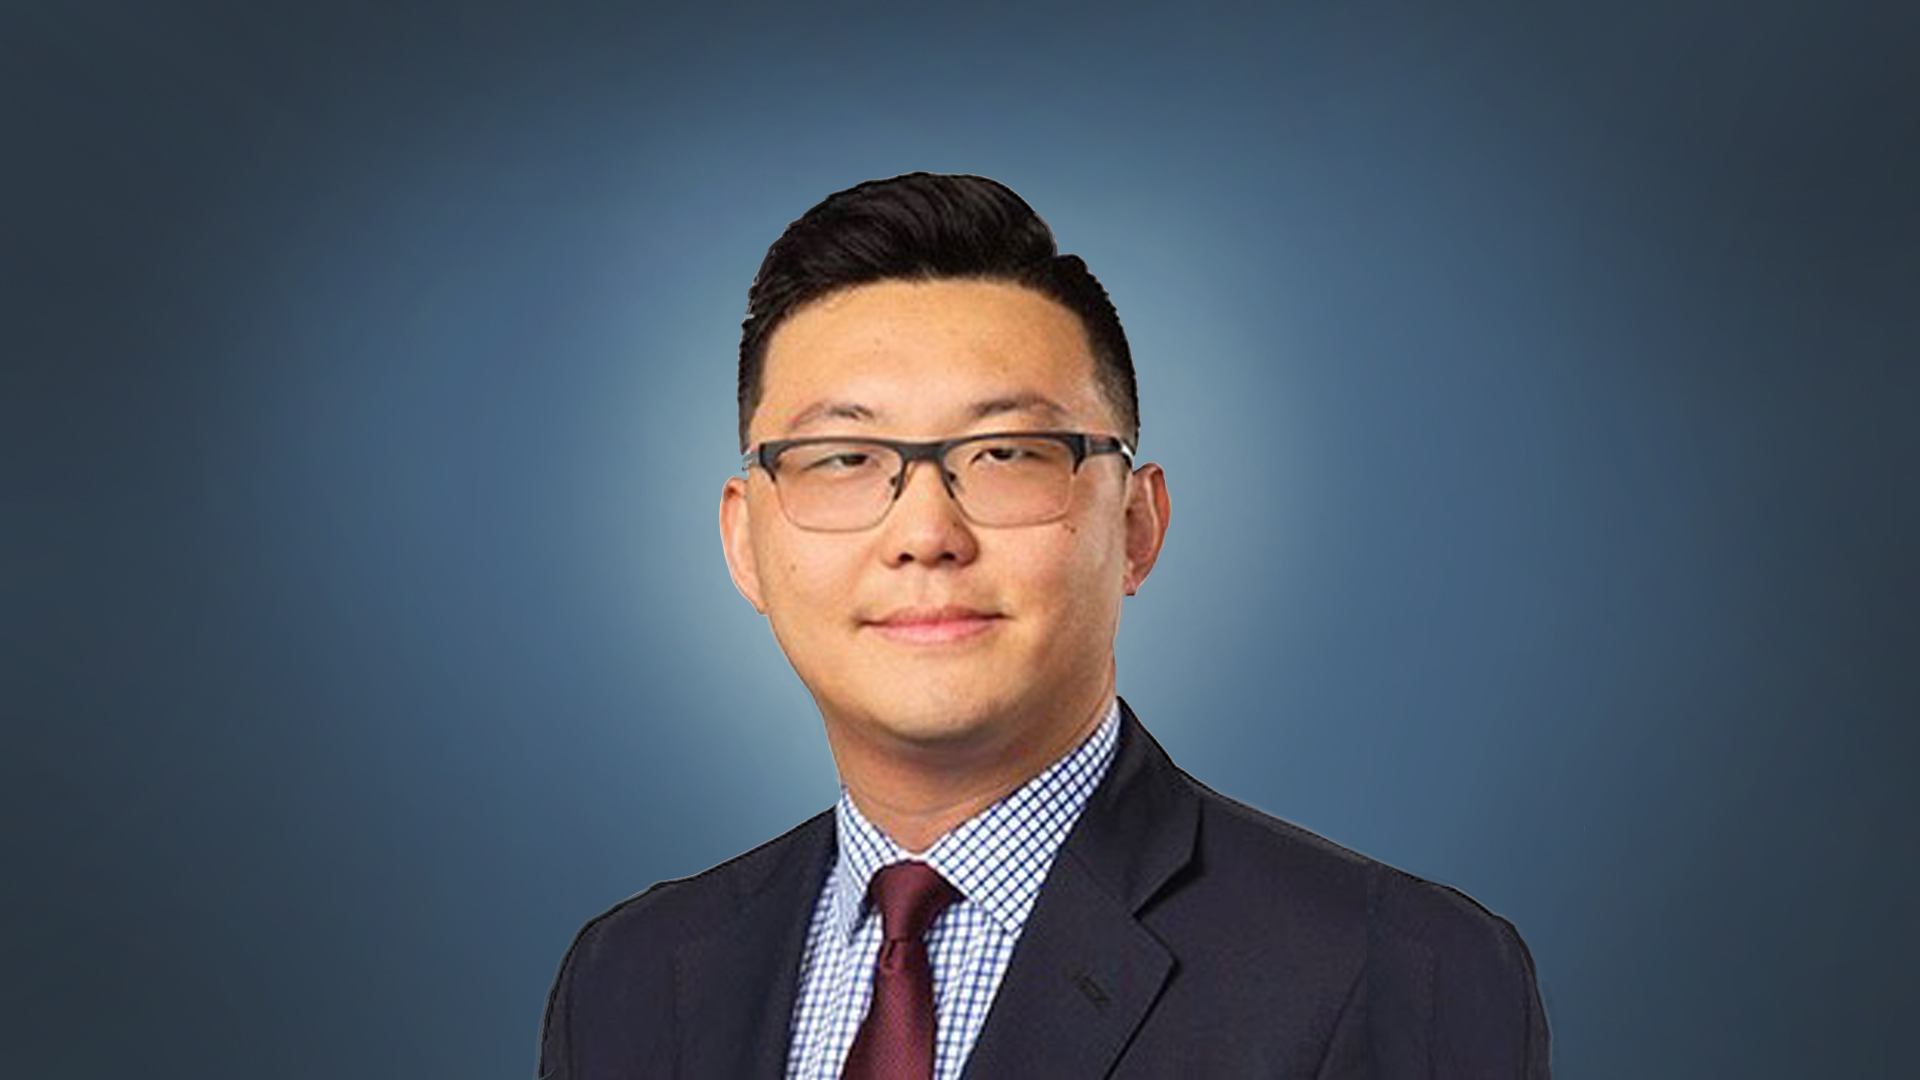 Guy Carpenter’s Bo Jiang to present on the evolving role of actuaries at RISC